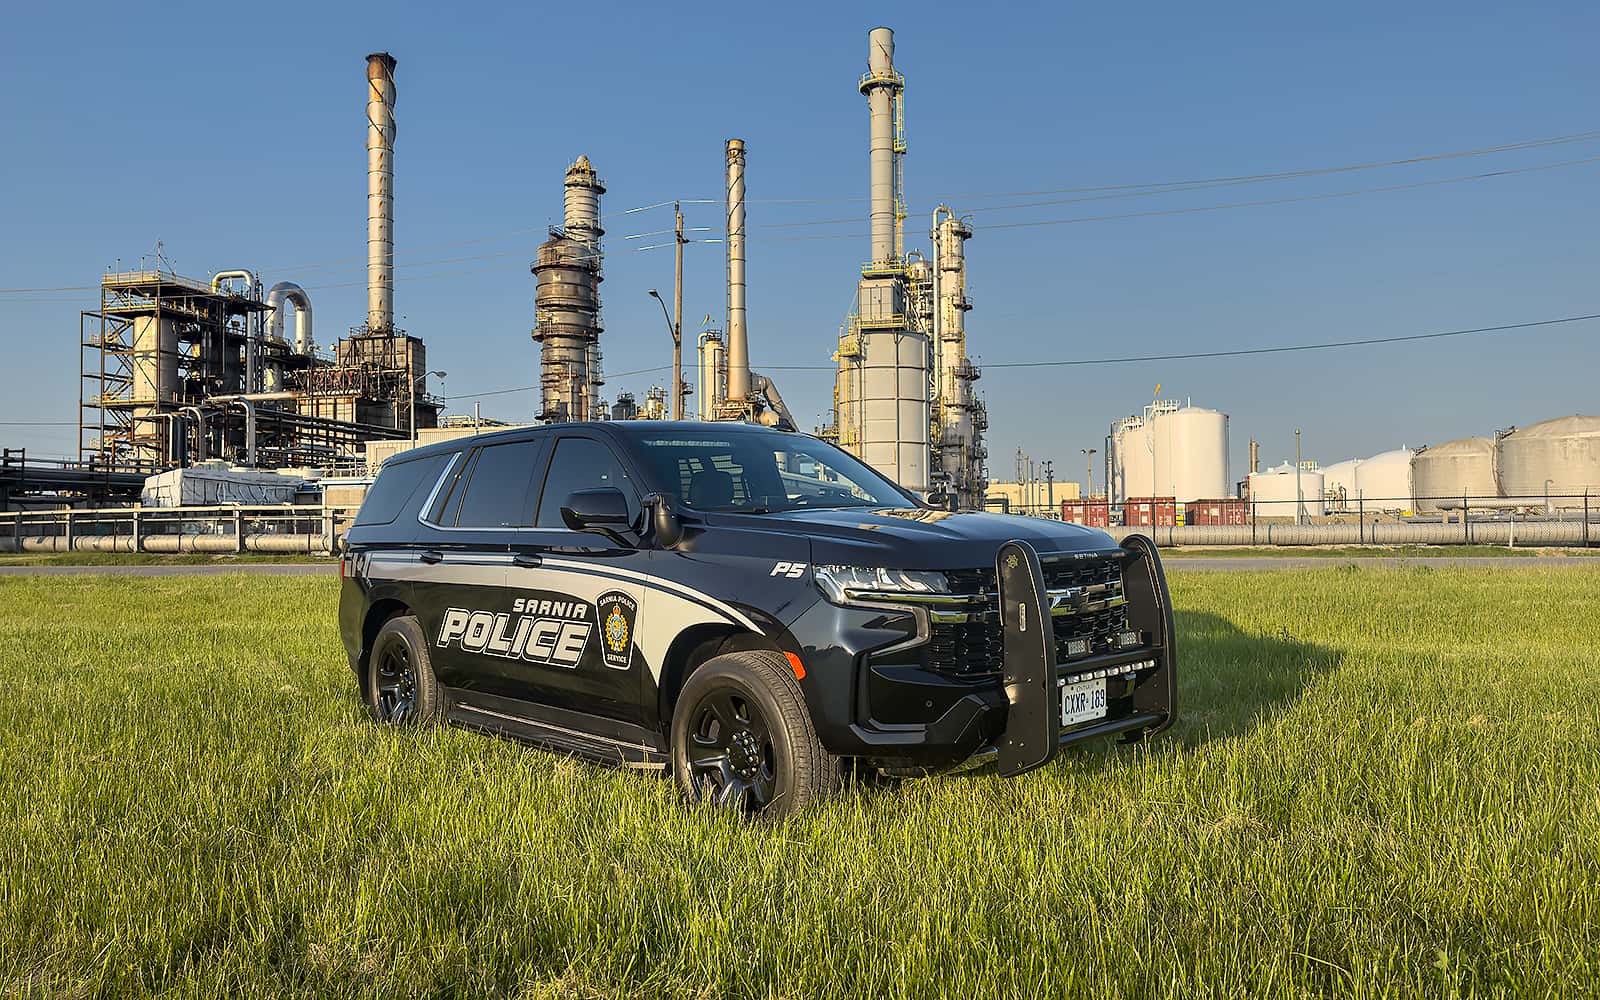 Sarnia police vehicle in grass field in front of chemical plant